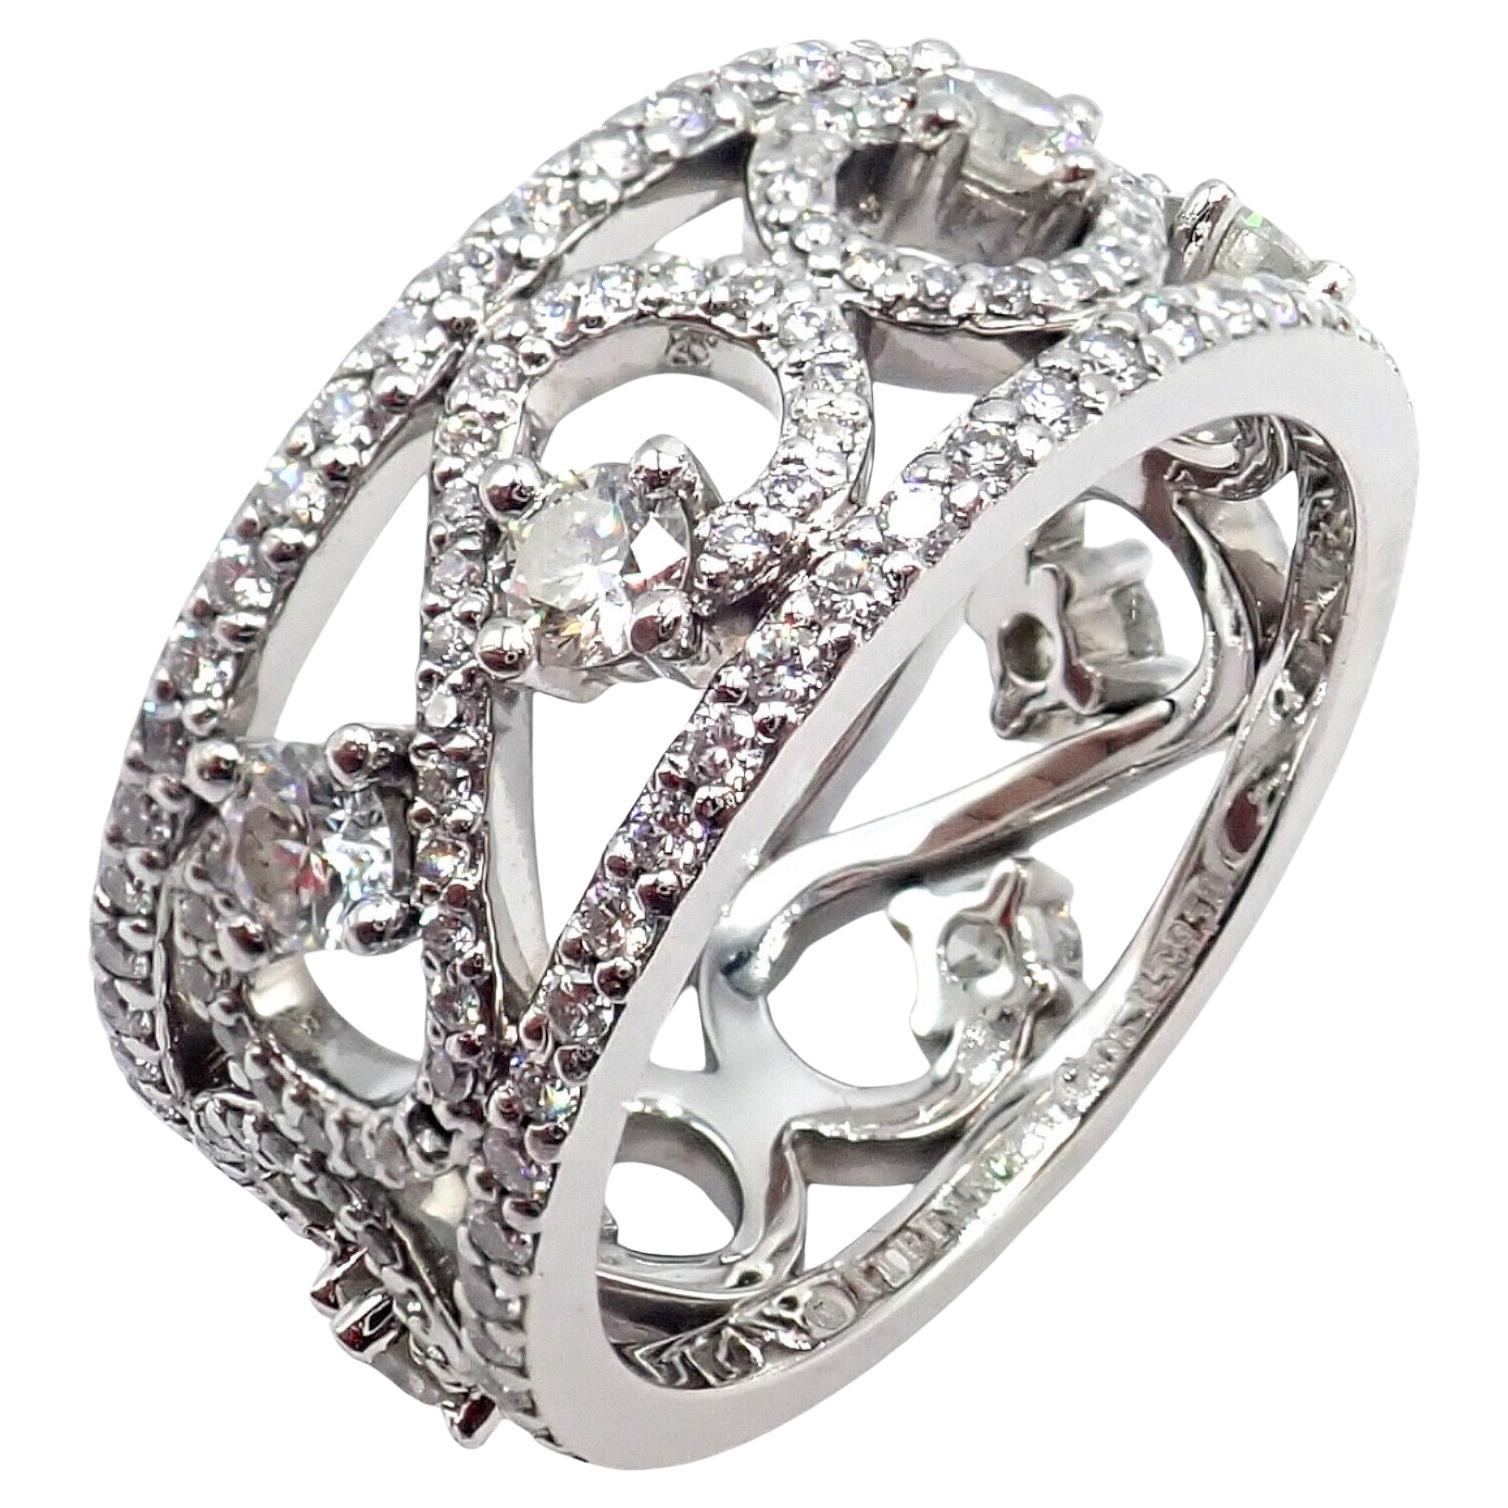 Tiffany & Co Platinum Diamond Enchant Scroll Wide Band Ring. 
With 218 Round Brilliant Cut Diamond VS1 clarity, G color, Total weight Approx 1.70ctw
The Authentic Tiffany & Co Platinum Diamond Eternal Enchant Wide Band Ring is a testament to